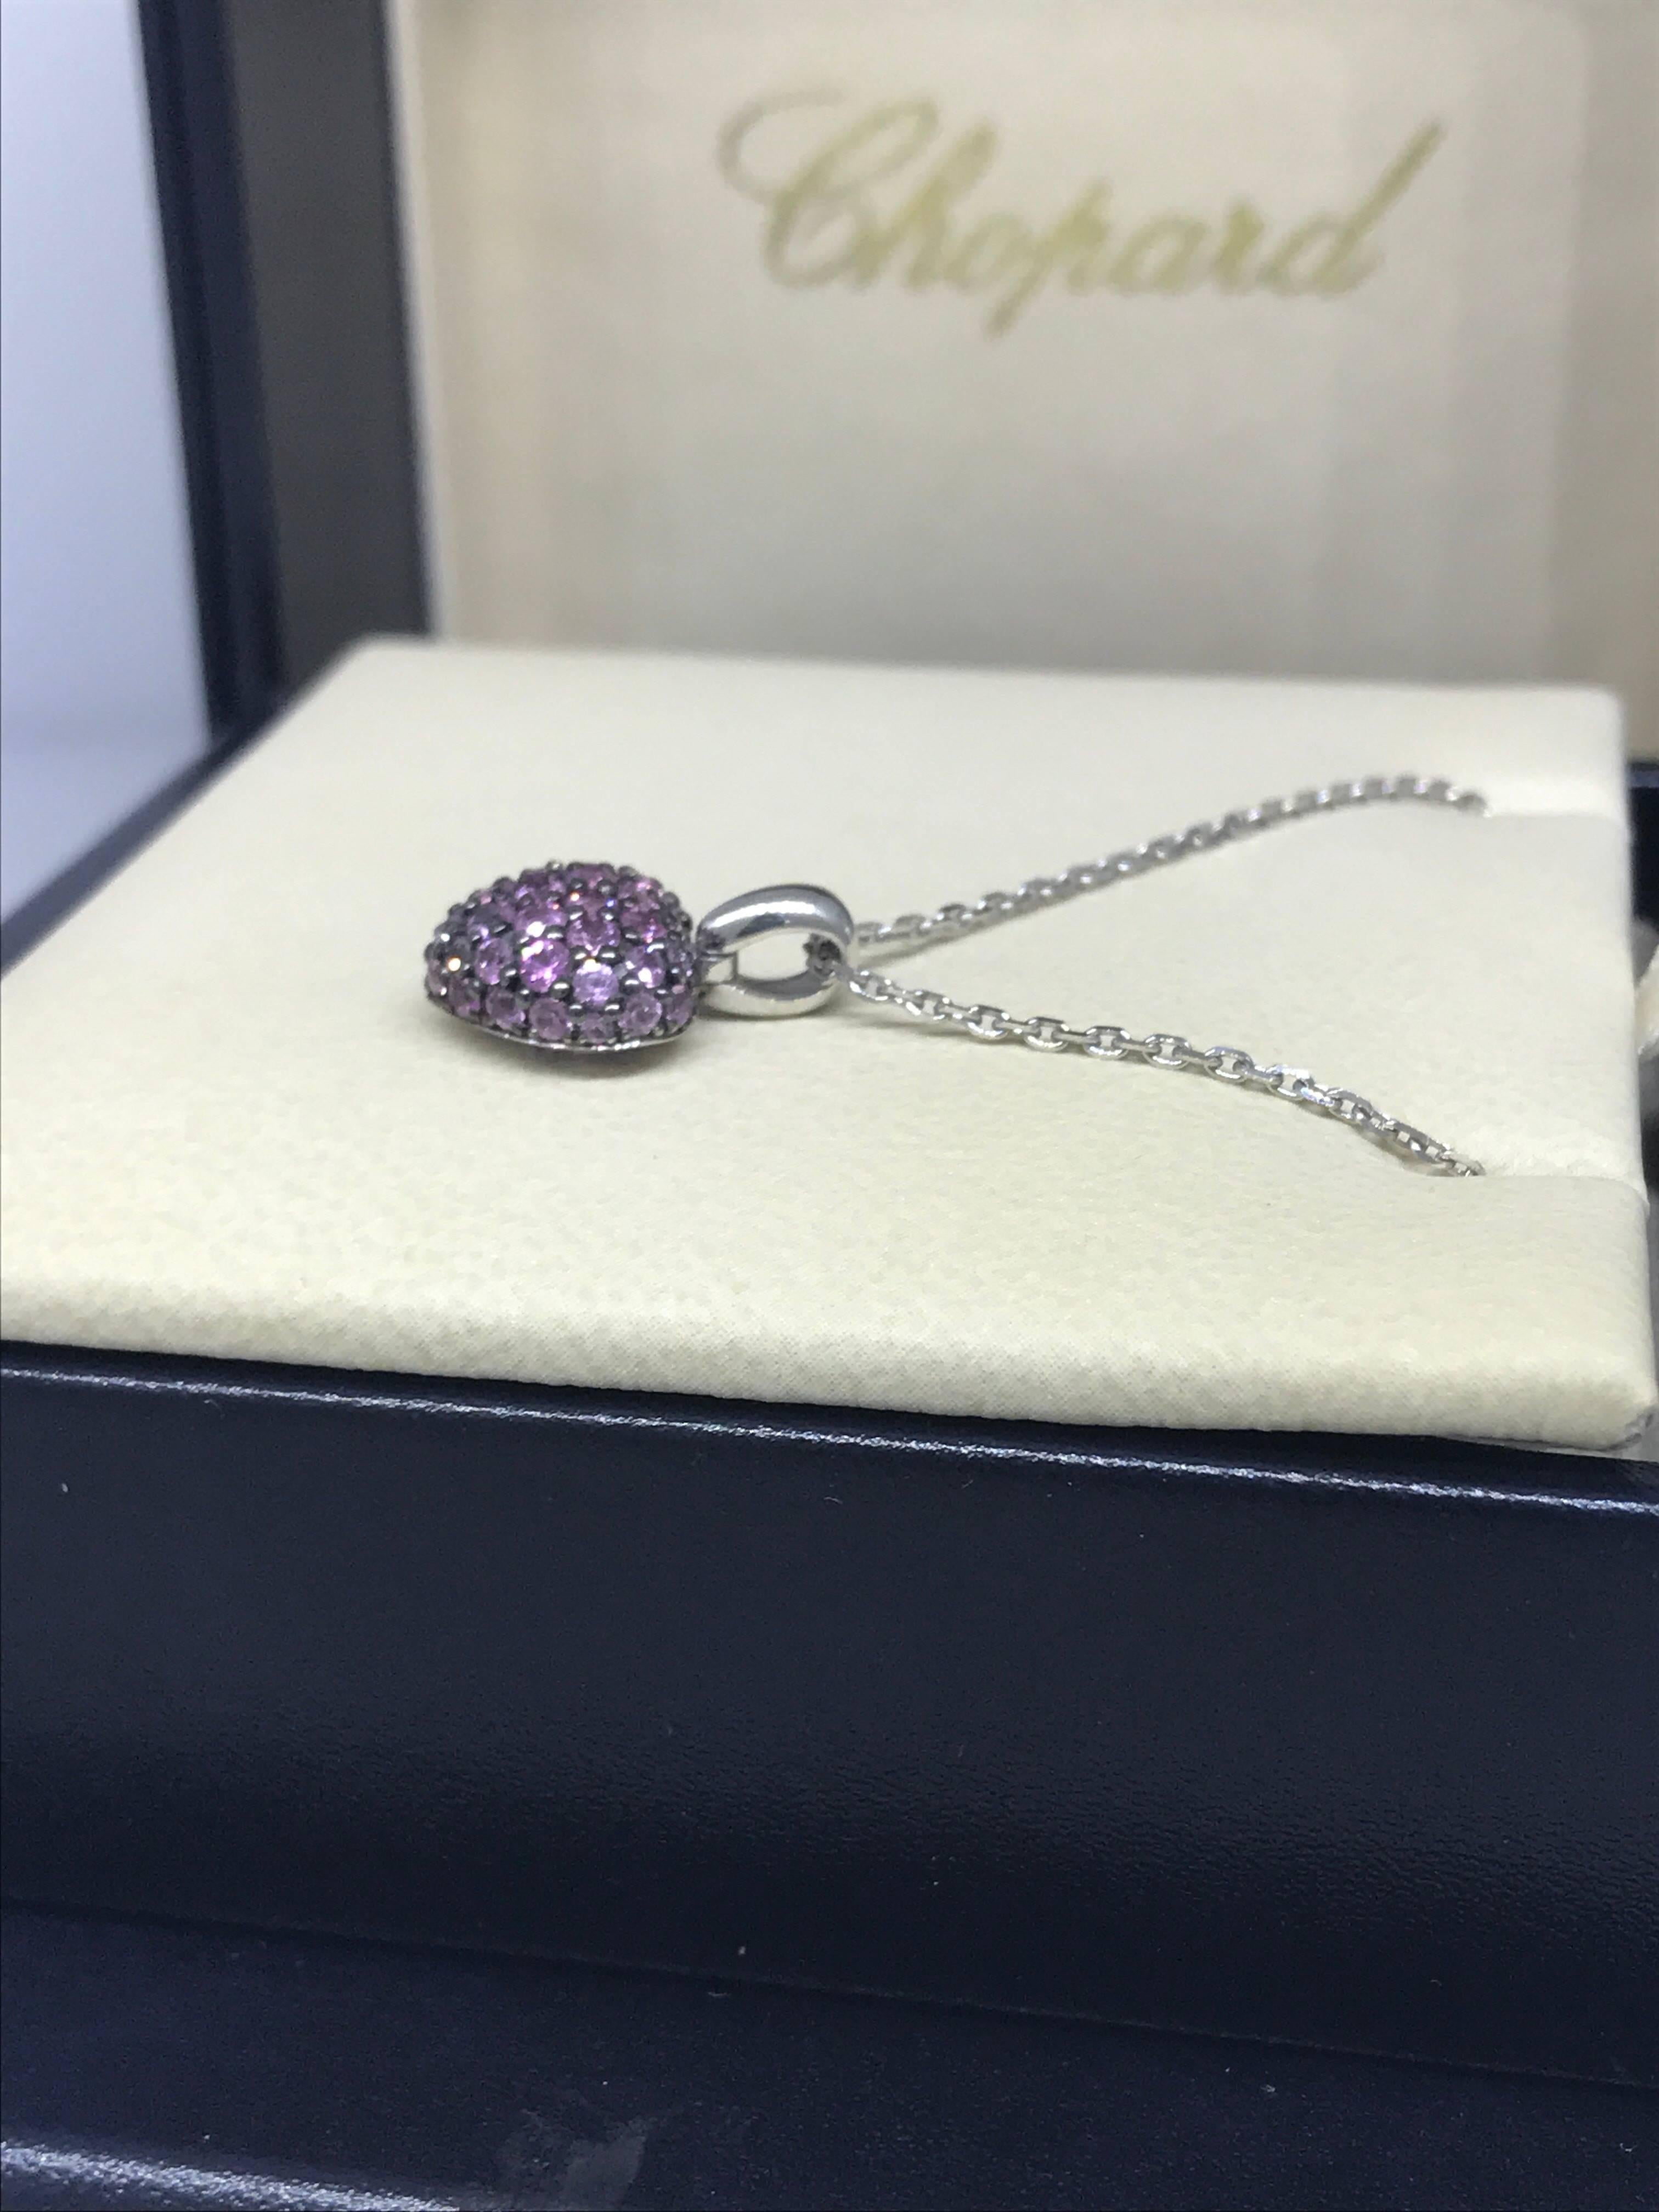 Chopard Heart Shaped Pendant 18 Karat White Gold Pink Sapphires New In New Condition For Sale In New York, NY